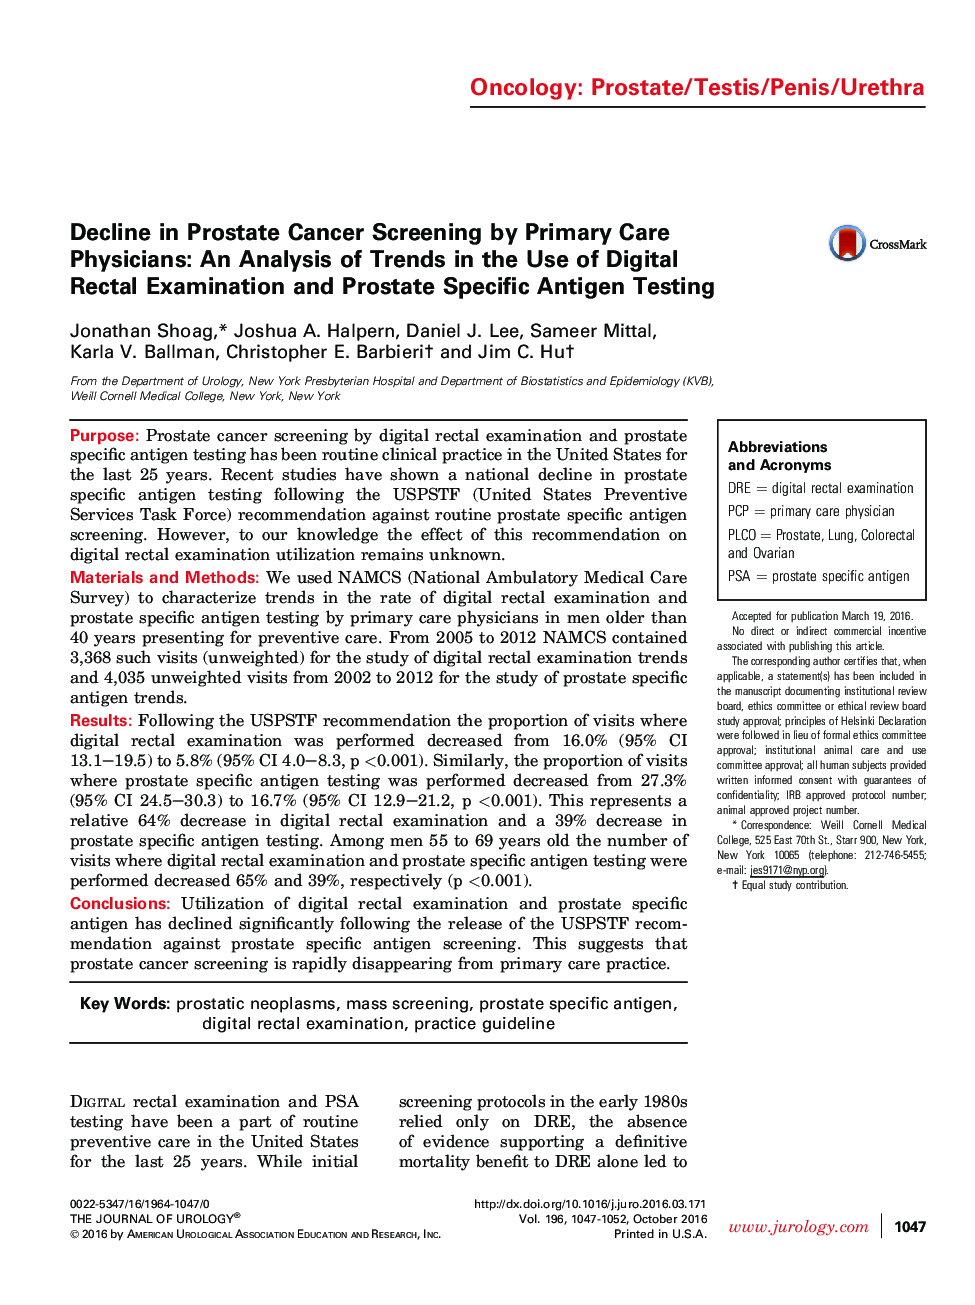 Decline in Prostate Cancer Screening by Primary Care Physicians: An Analysis of Trends in the Use of Digital Rectal Examination and Prostate Specific Antigen Testing 